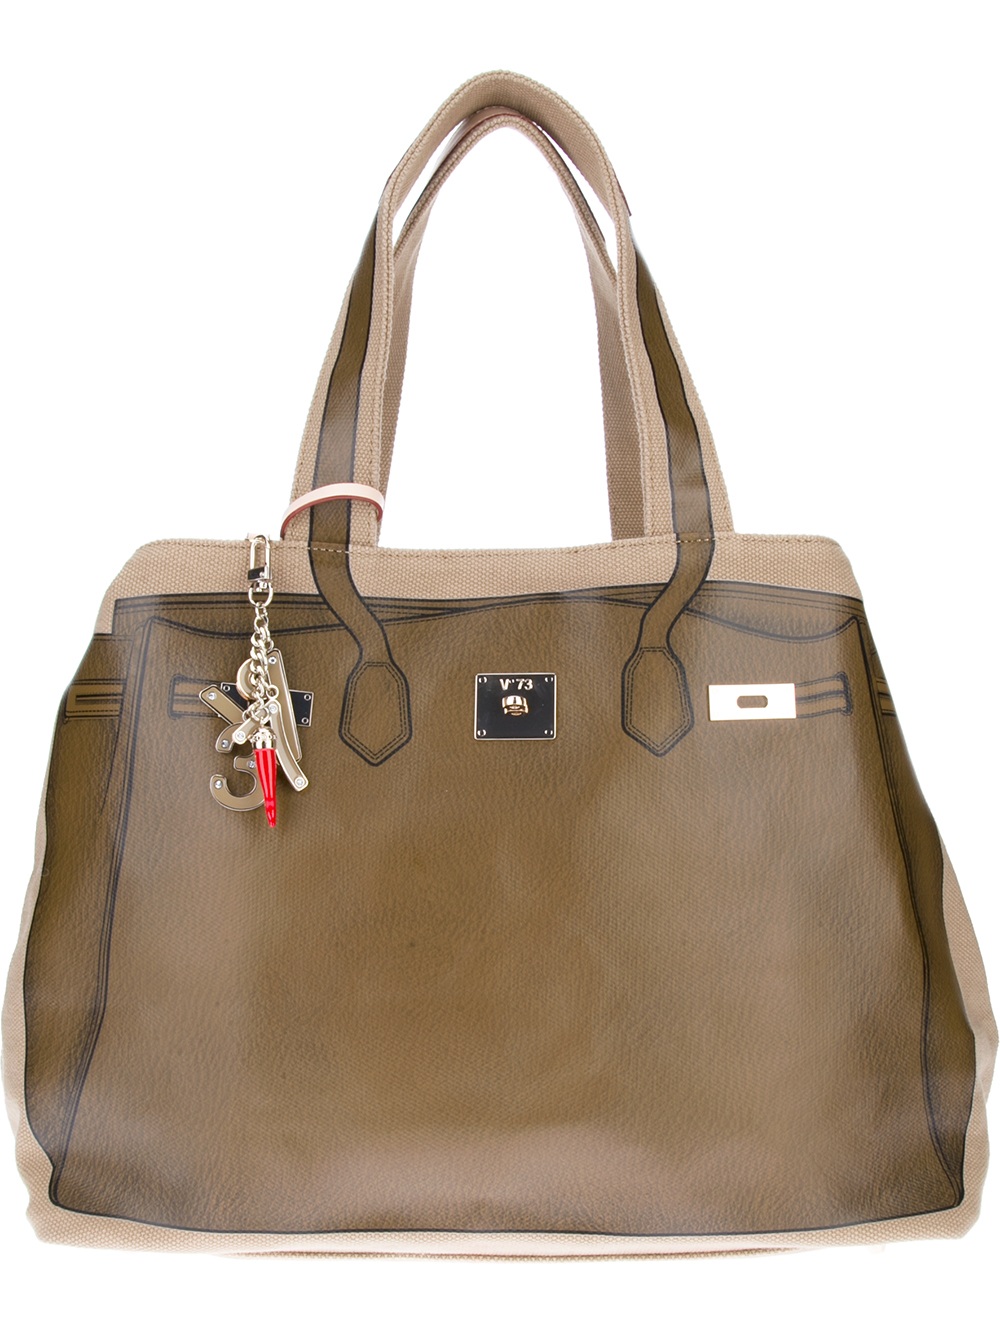 V73 Printed Canvas Tote in Green (brown) | Lyst  